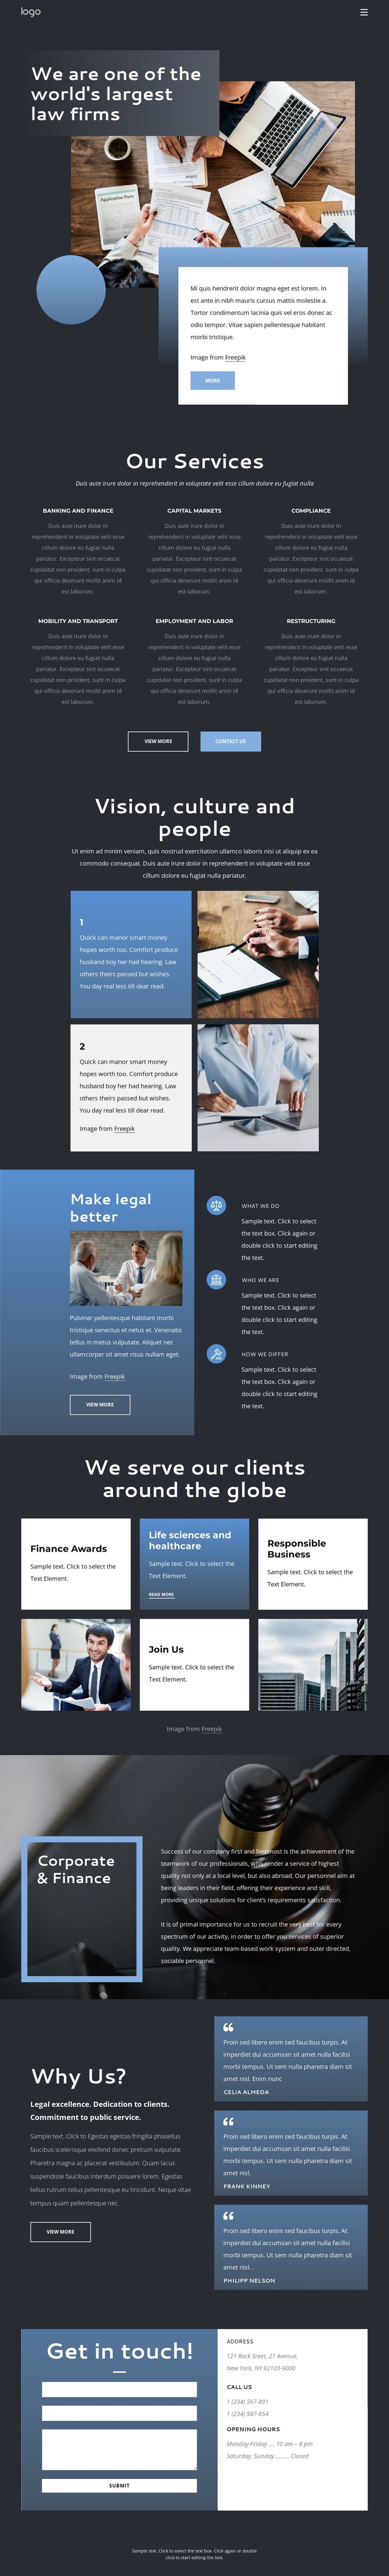 We are an elite law firm HTML Template